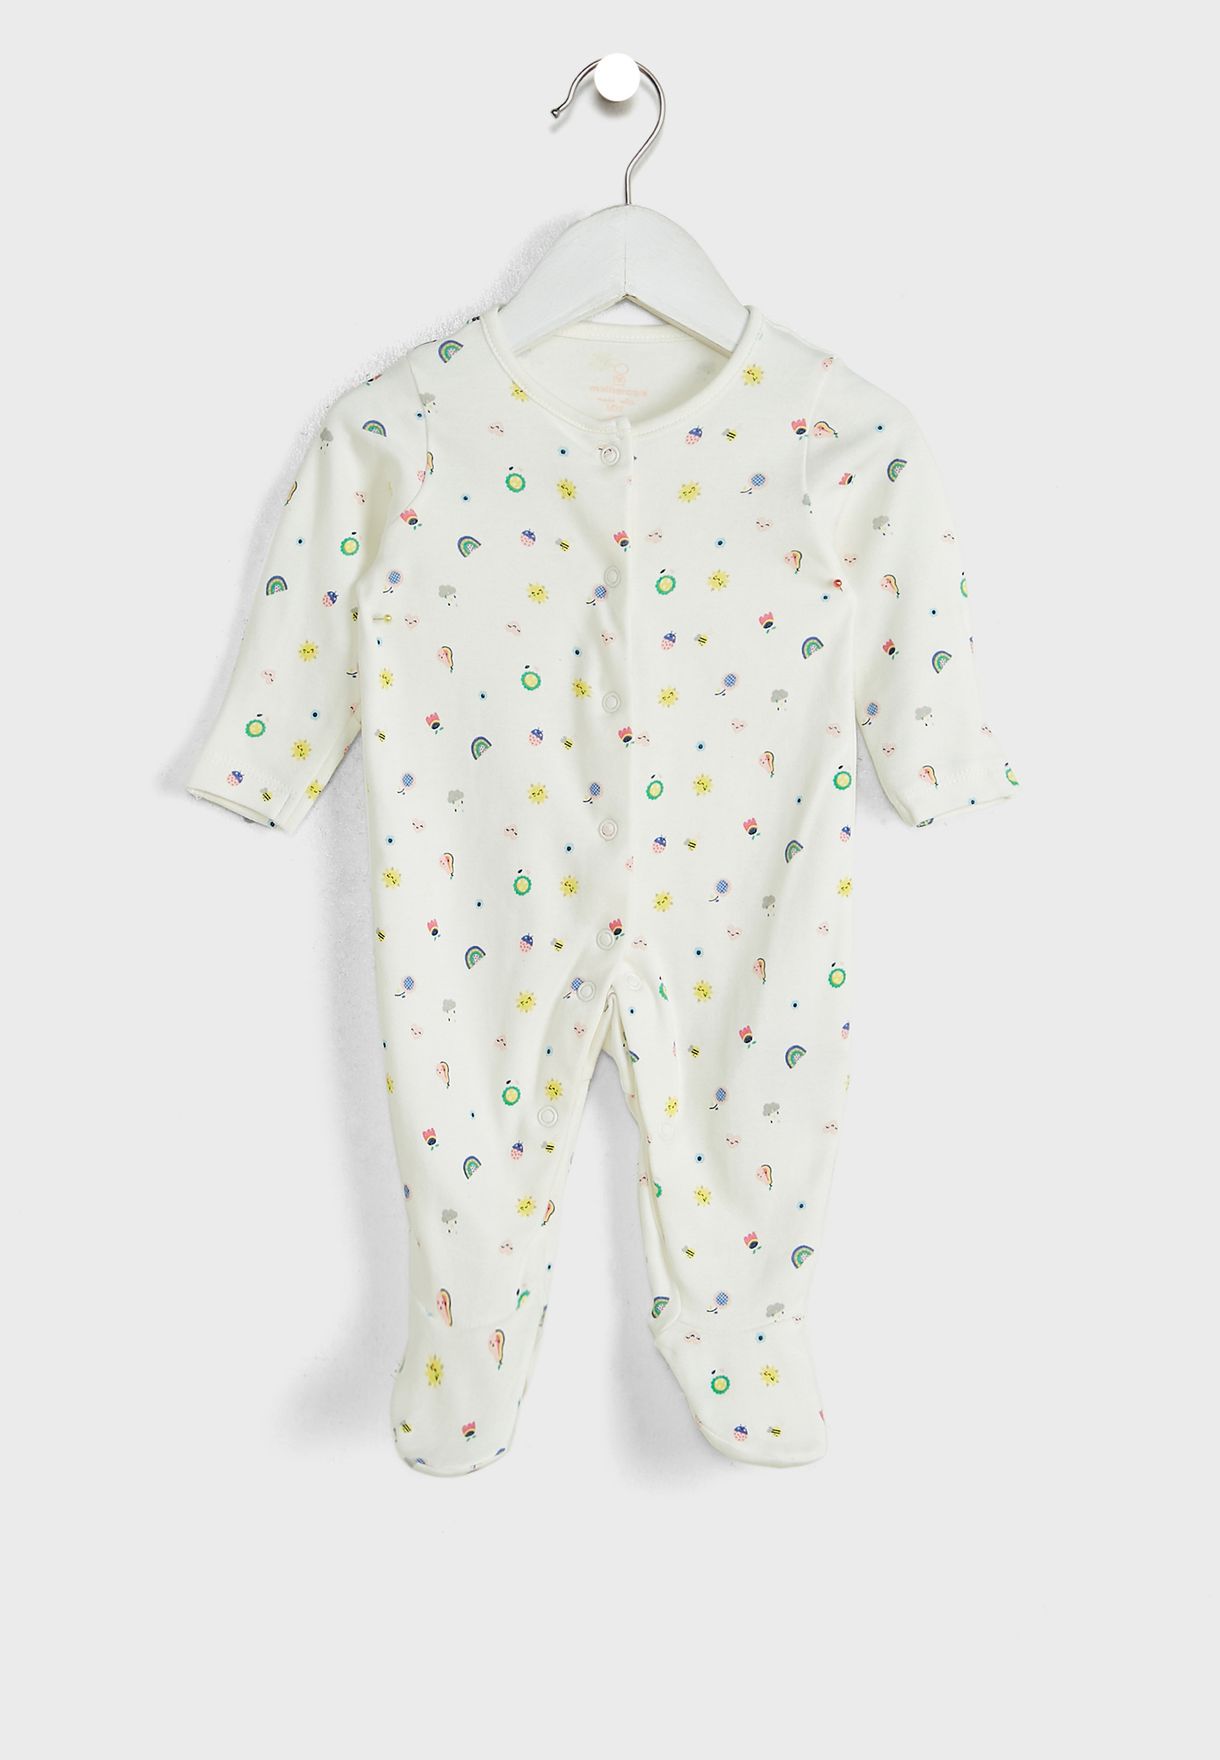 Infant 3 Pack Assorted Onesie